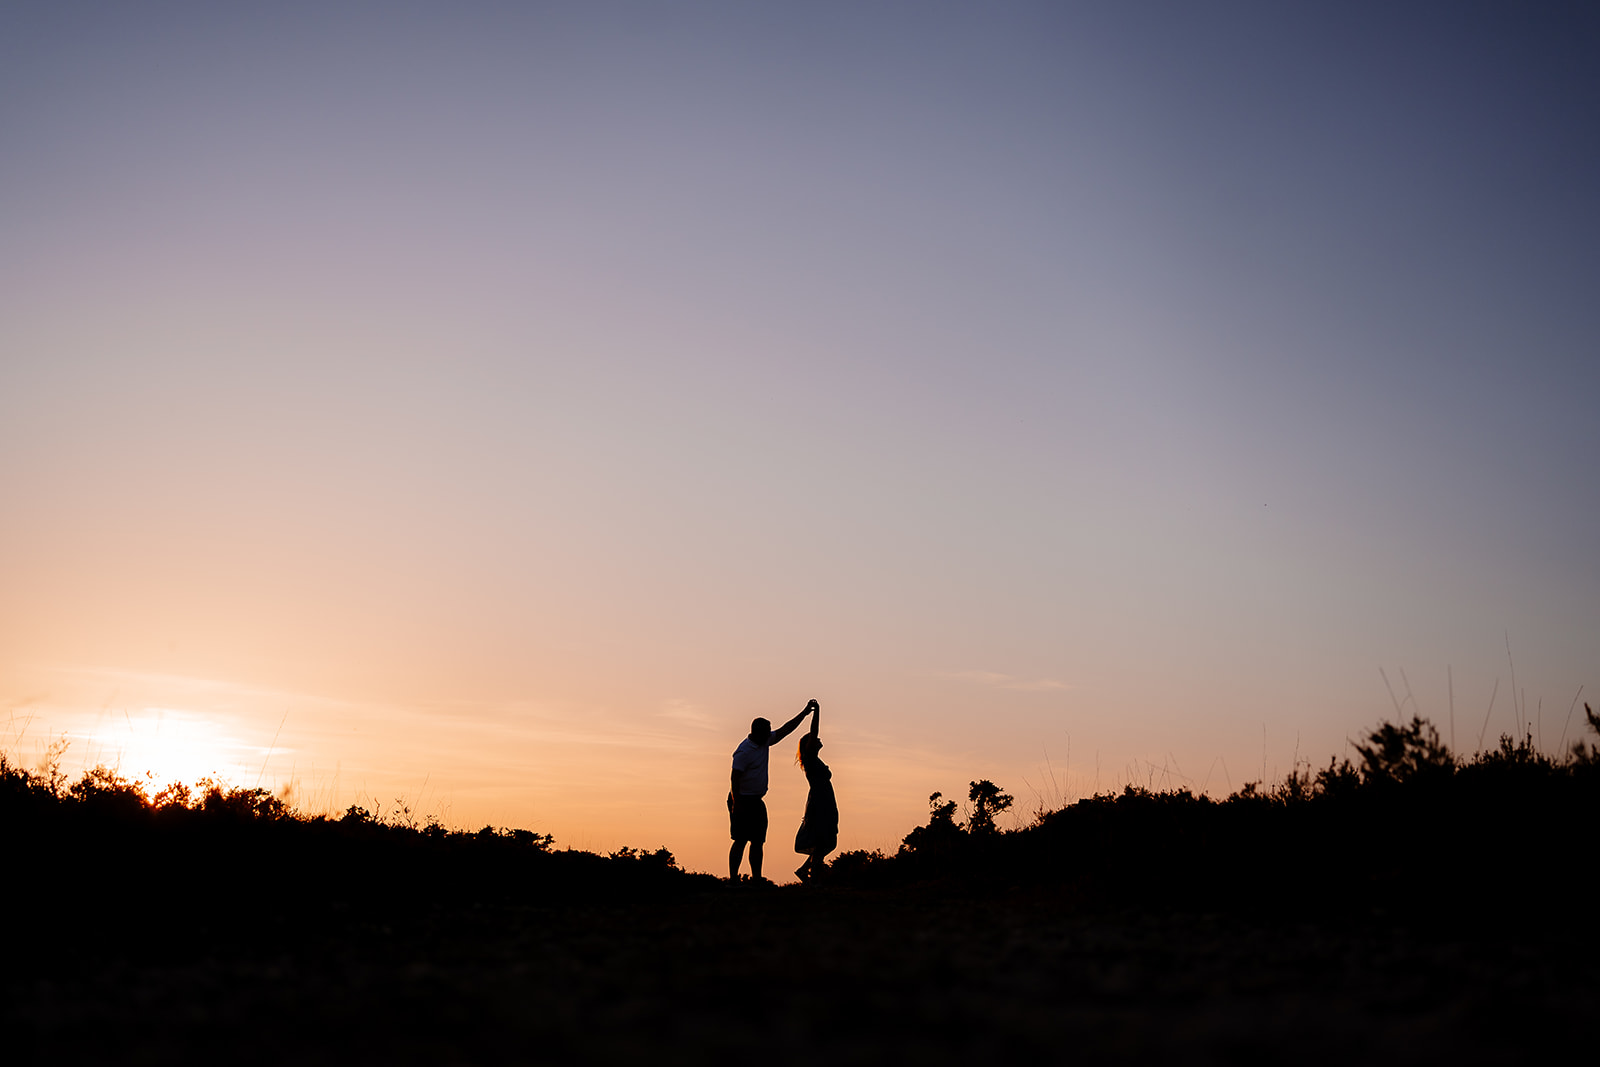 Silhouette of a couple dancing together in front of a sunset just dipping behind the horizon. 